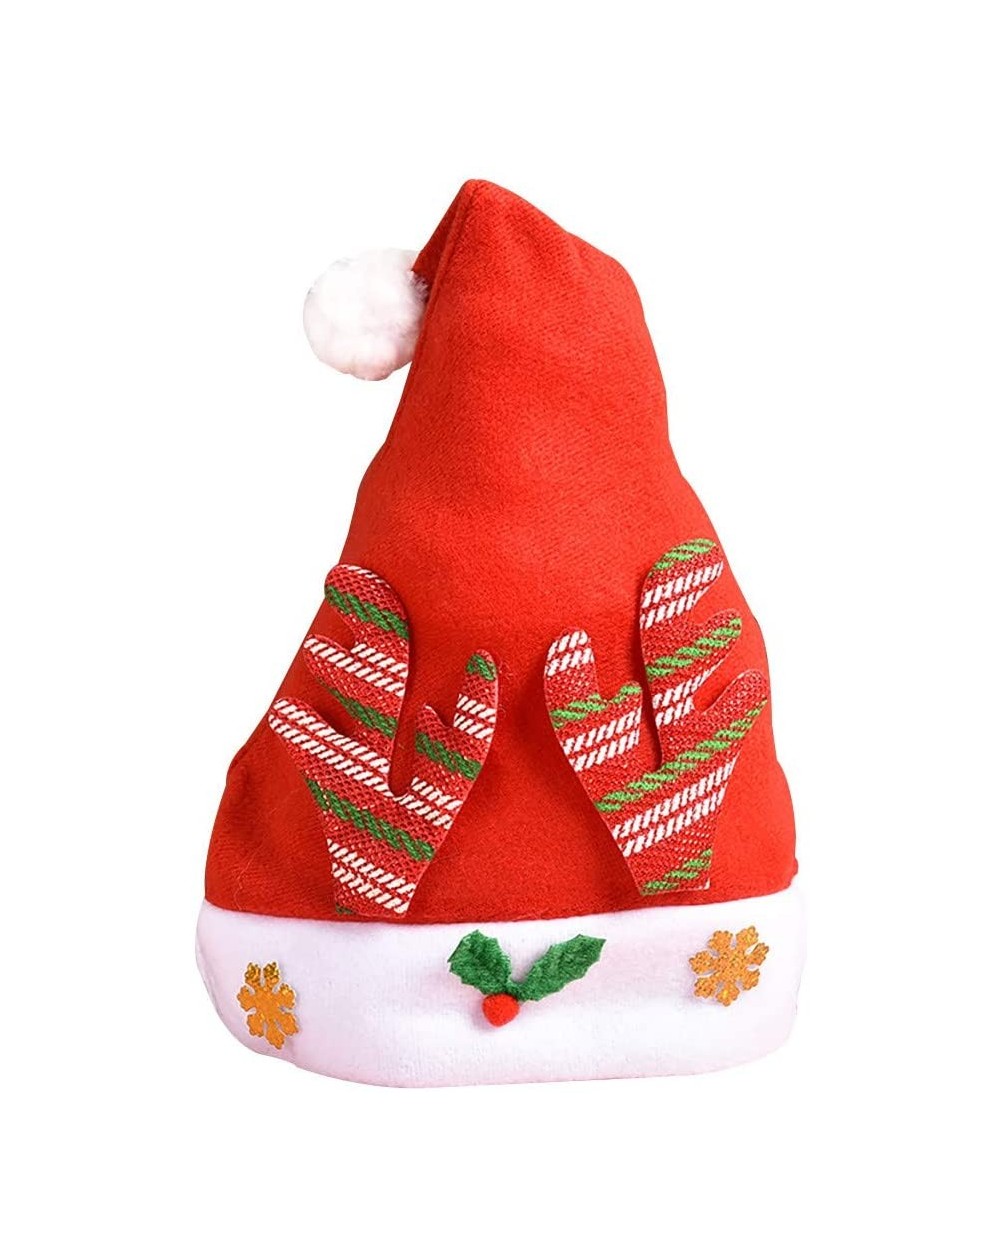 Hats Christmas Hat- Santa Hat- Xmas Holiday Hat for Adults Kids Pets- Unisex Velvet Comfort Christmas Hats for Christmas New ...